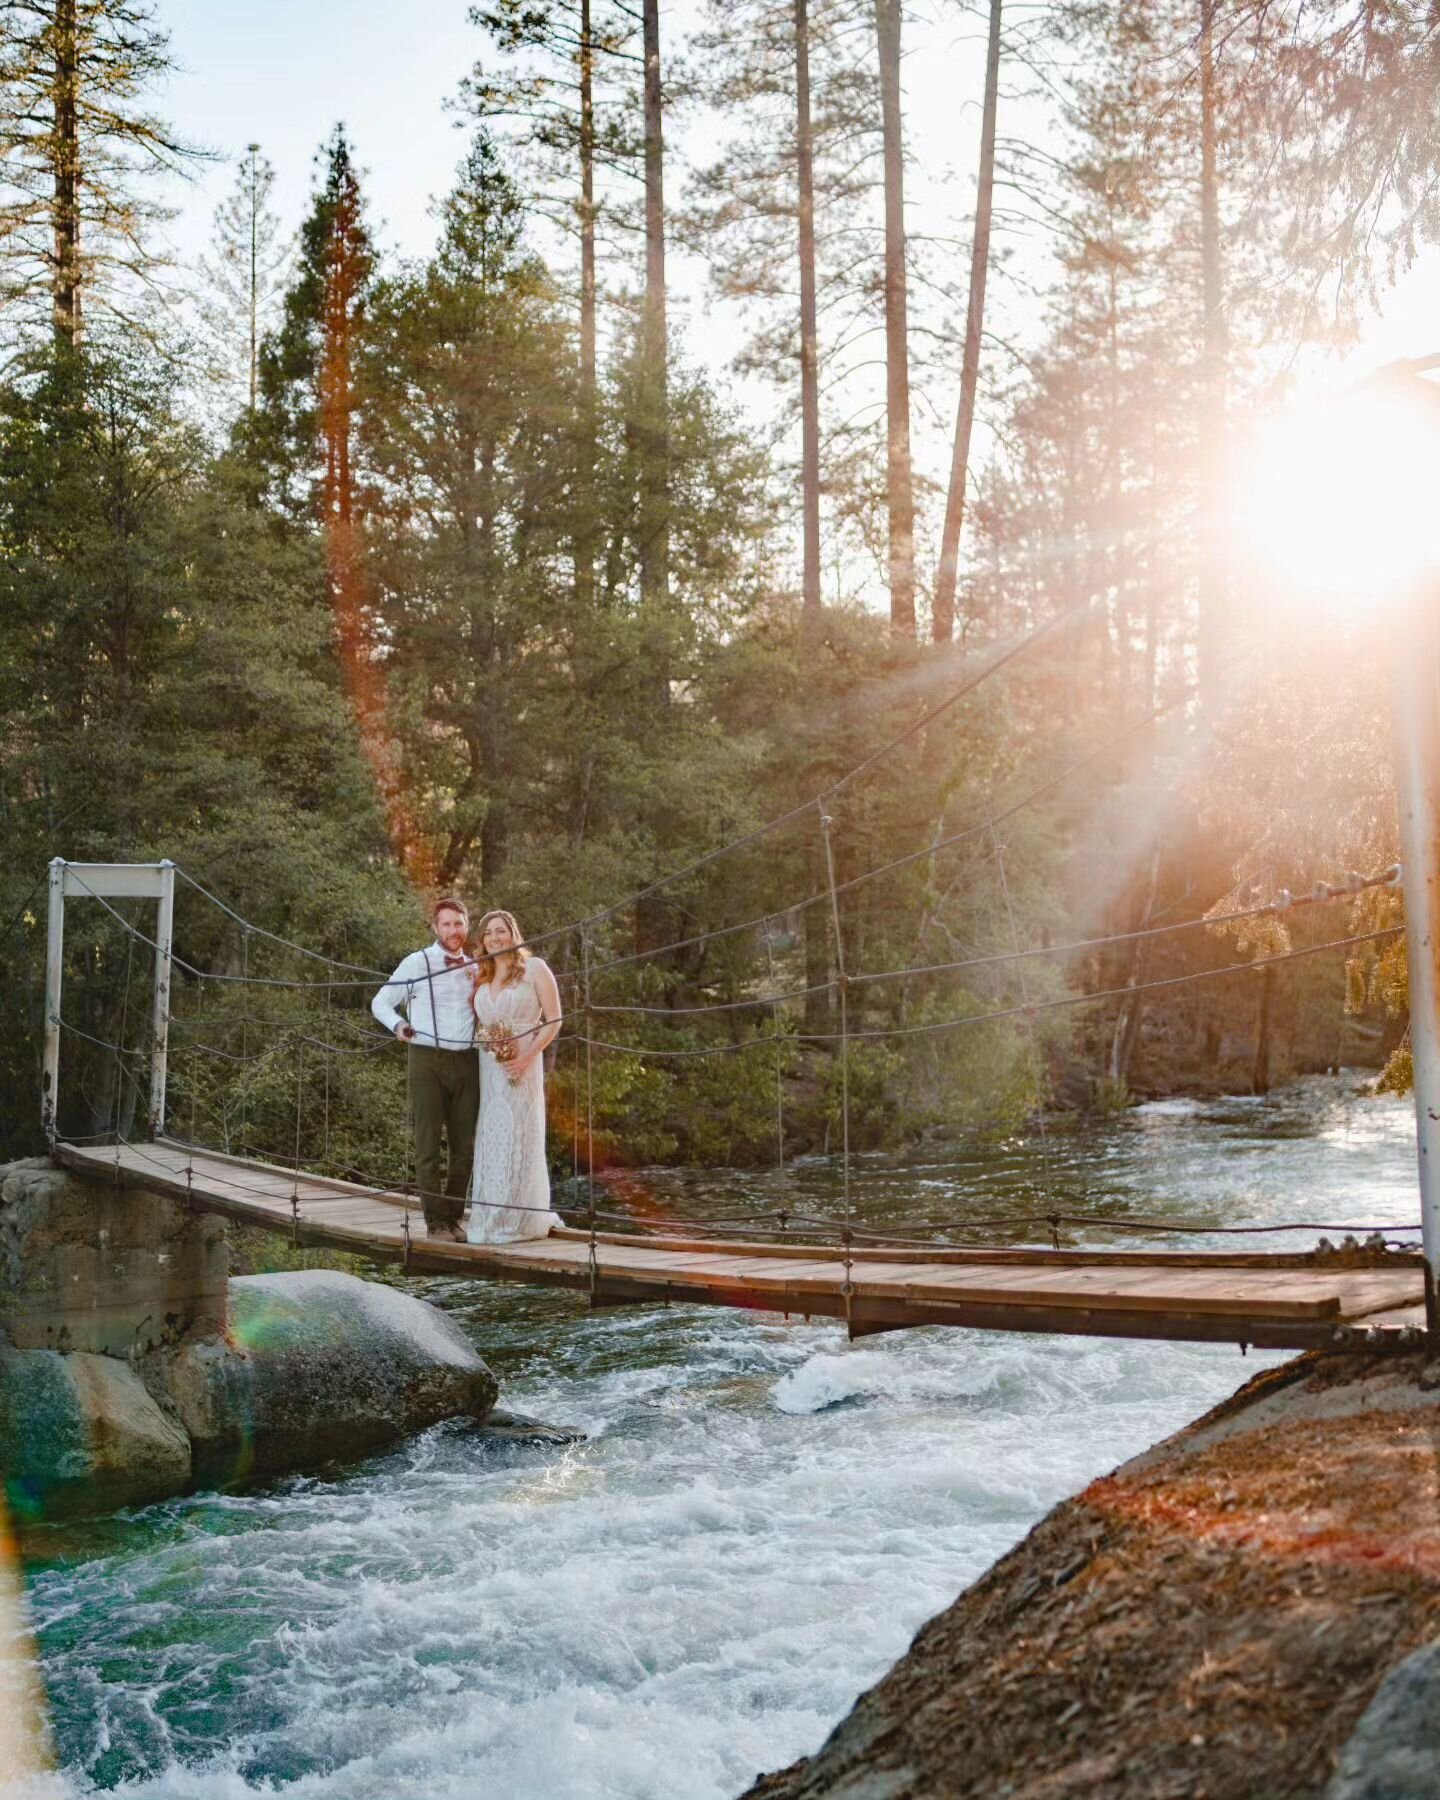 Prue romance and adventure up in the mountains of Yosemite National Park, USA.

I was lucky enough to photograph my first destination wedding this year and... wow, what an incredible day it was!

Venue - @redwoodsinyosemite 

#weddingphotography #wed